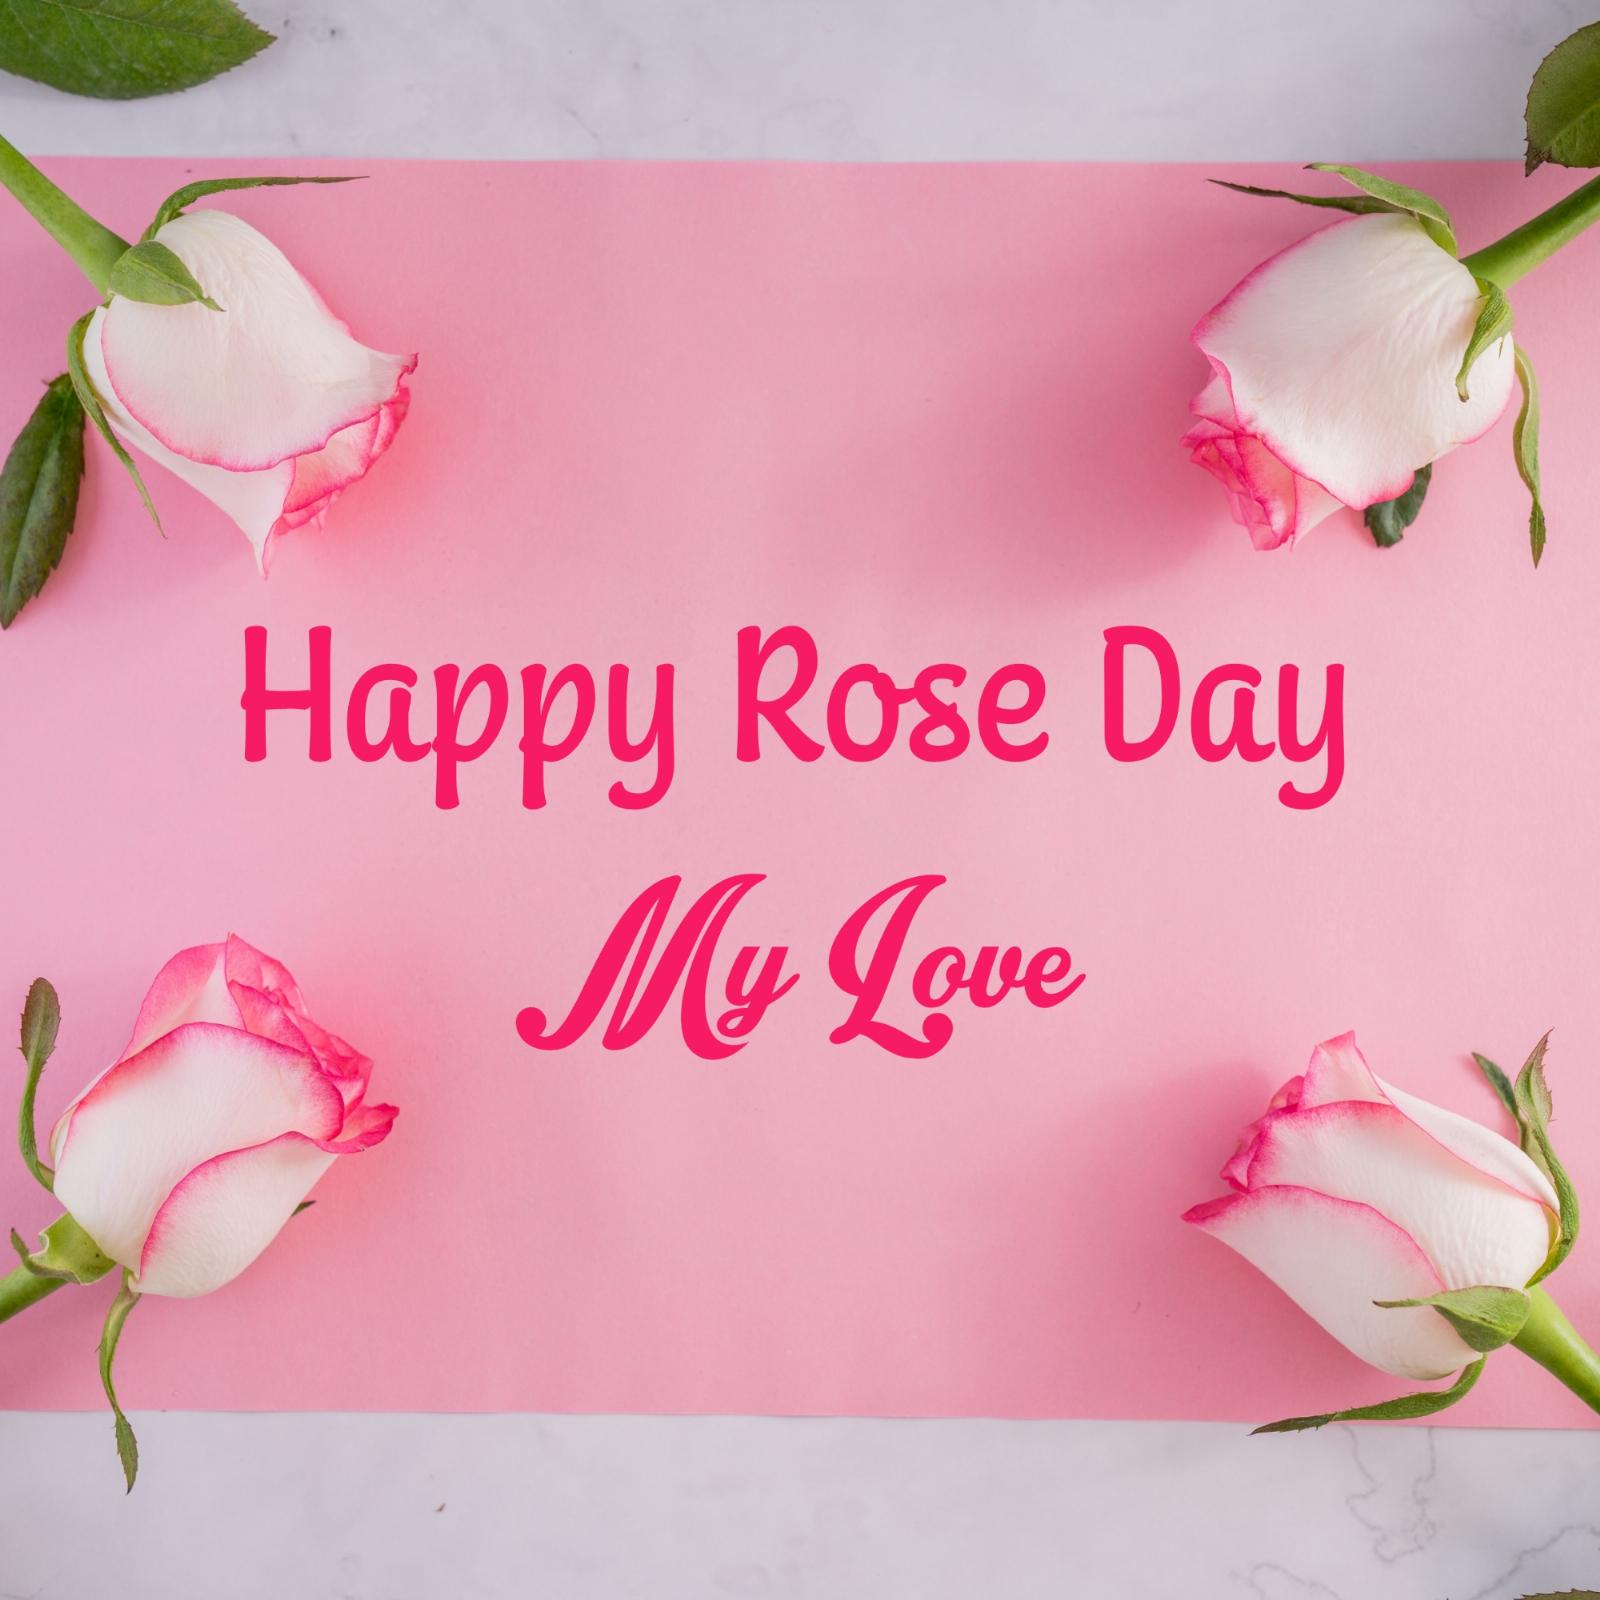 Happy Rose Day My Love Images